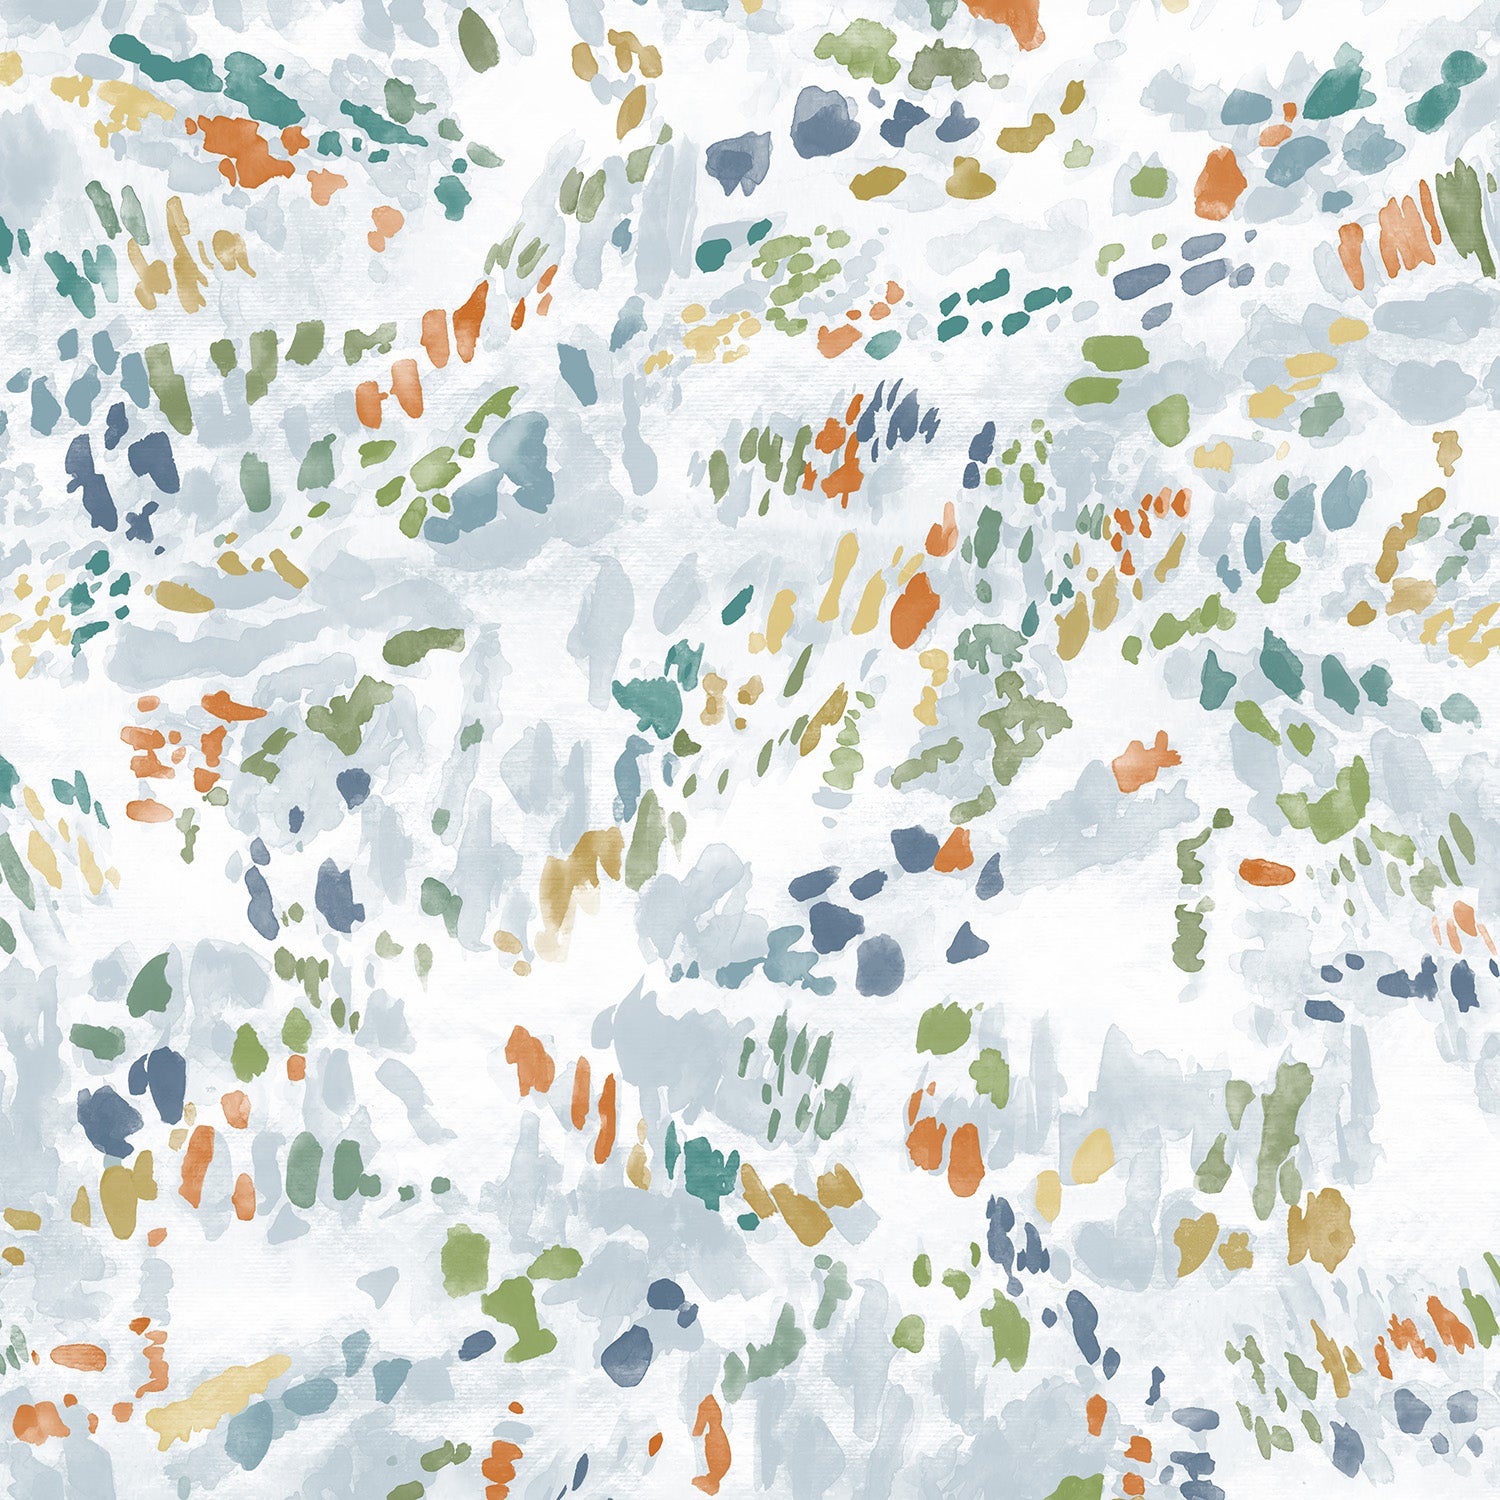 Detail of wallpaper in a dappled abstract print in shades of blue, green and orange on a white field.